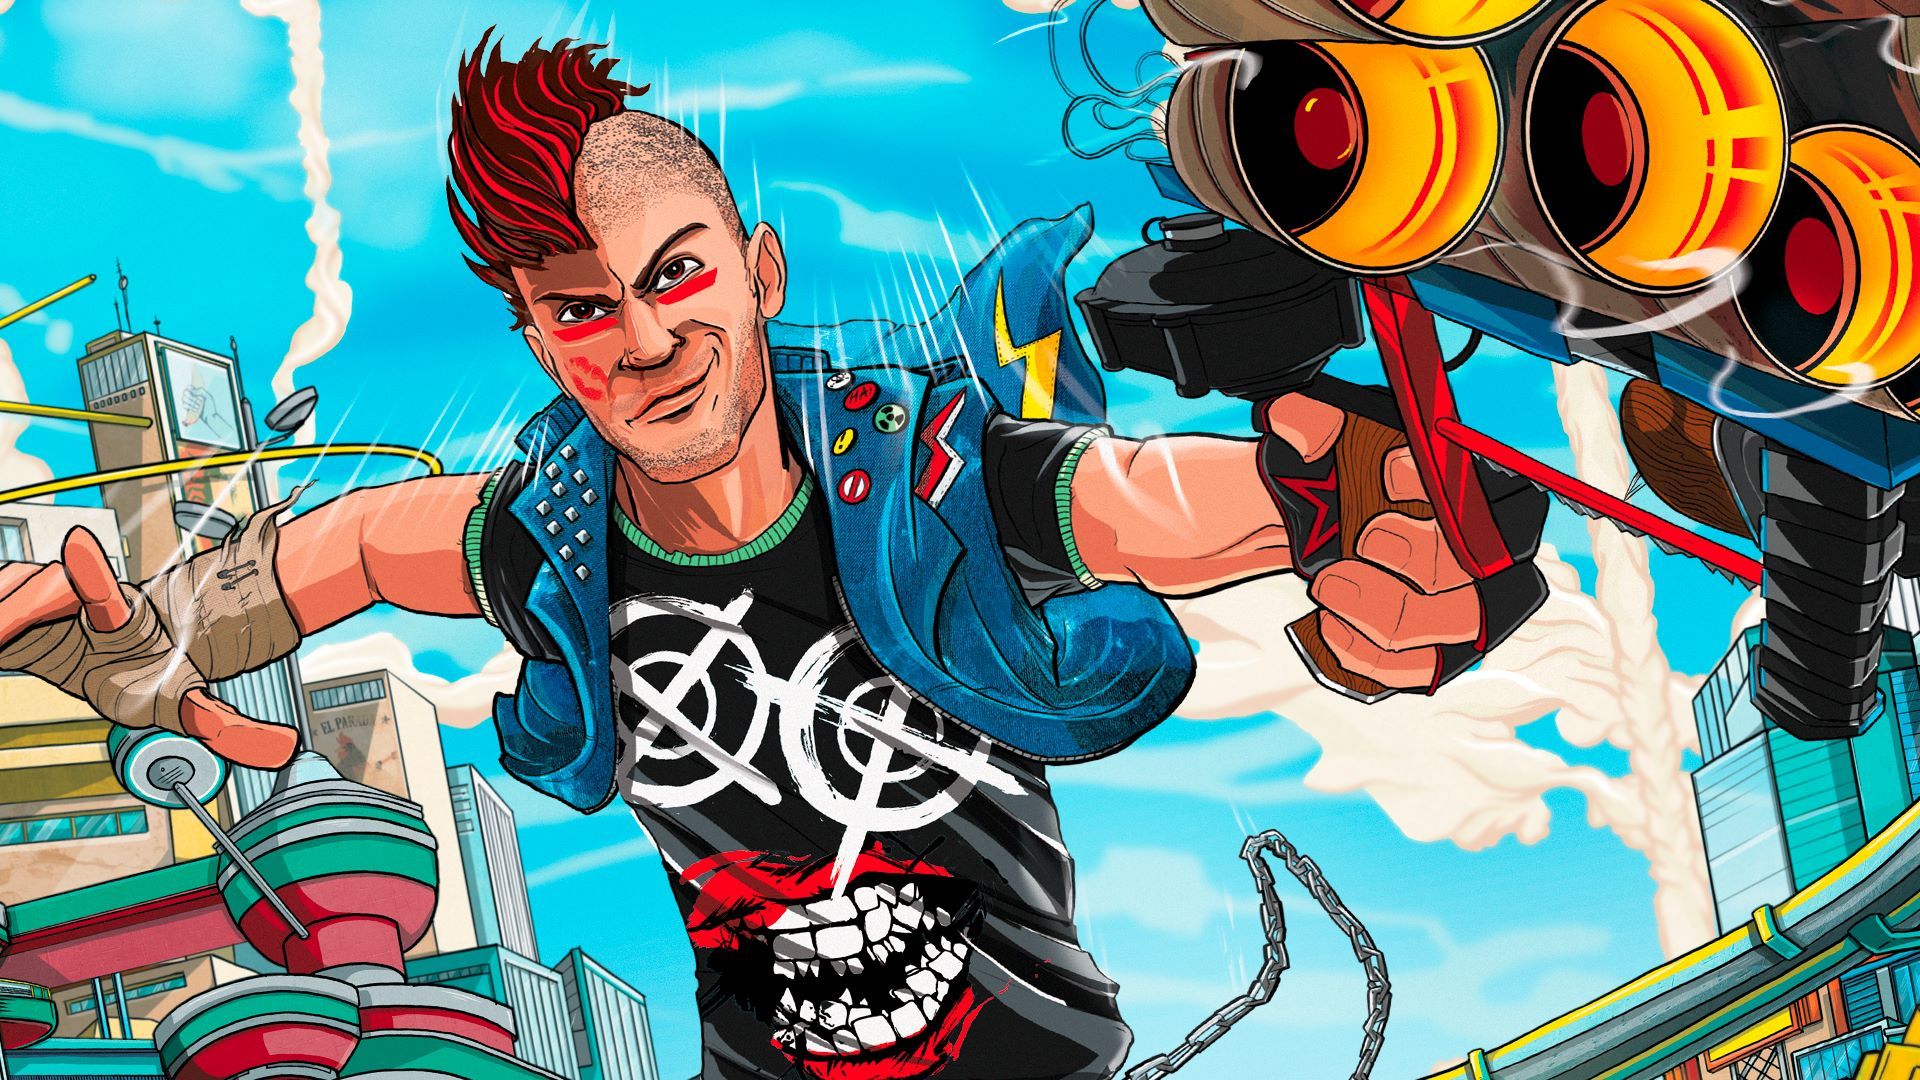 Sunset Overdrive comes to PC on November 16